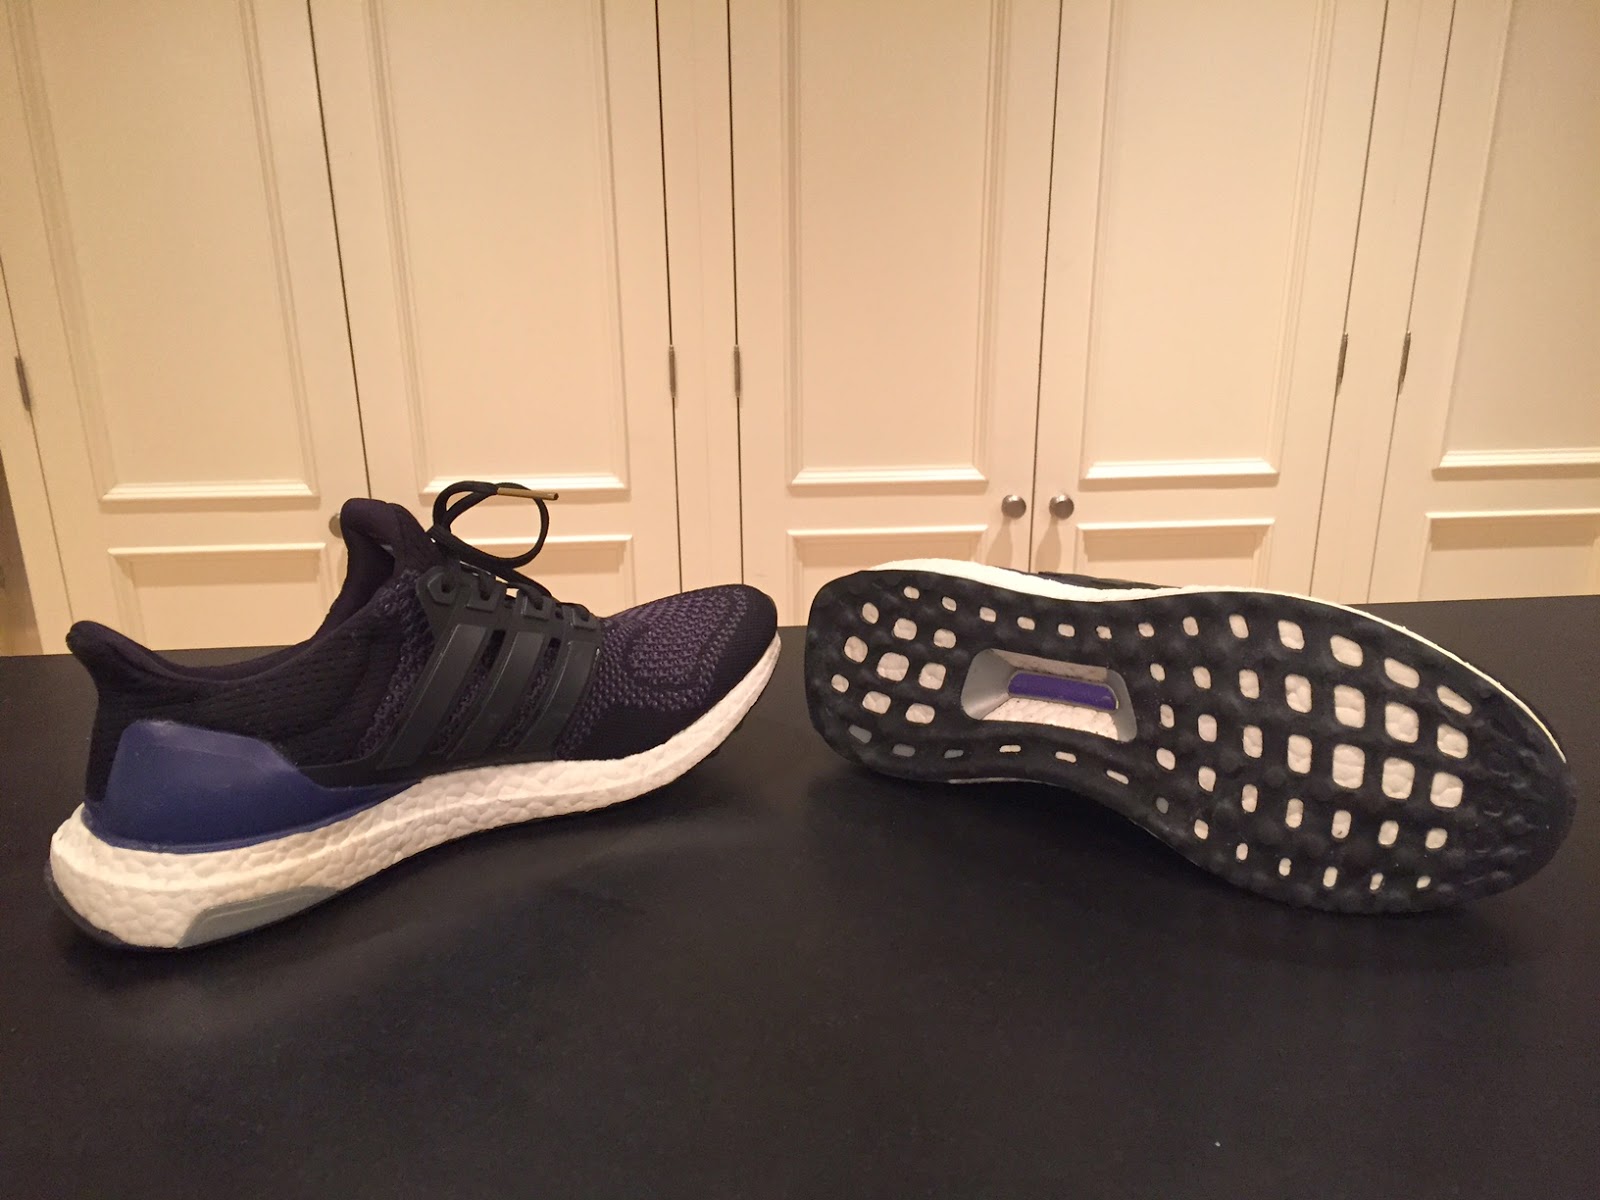 Adidas Ultra Boost 22 Review (2022): Should You Get this Sturdy Trainer?